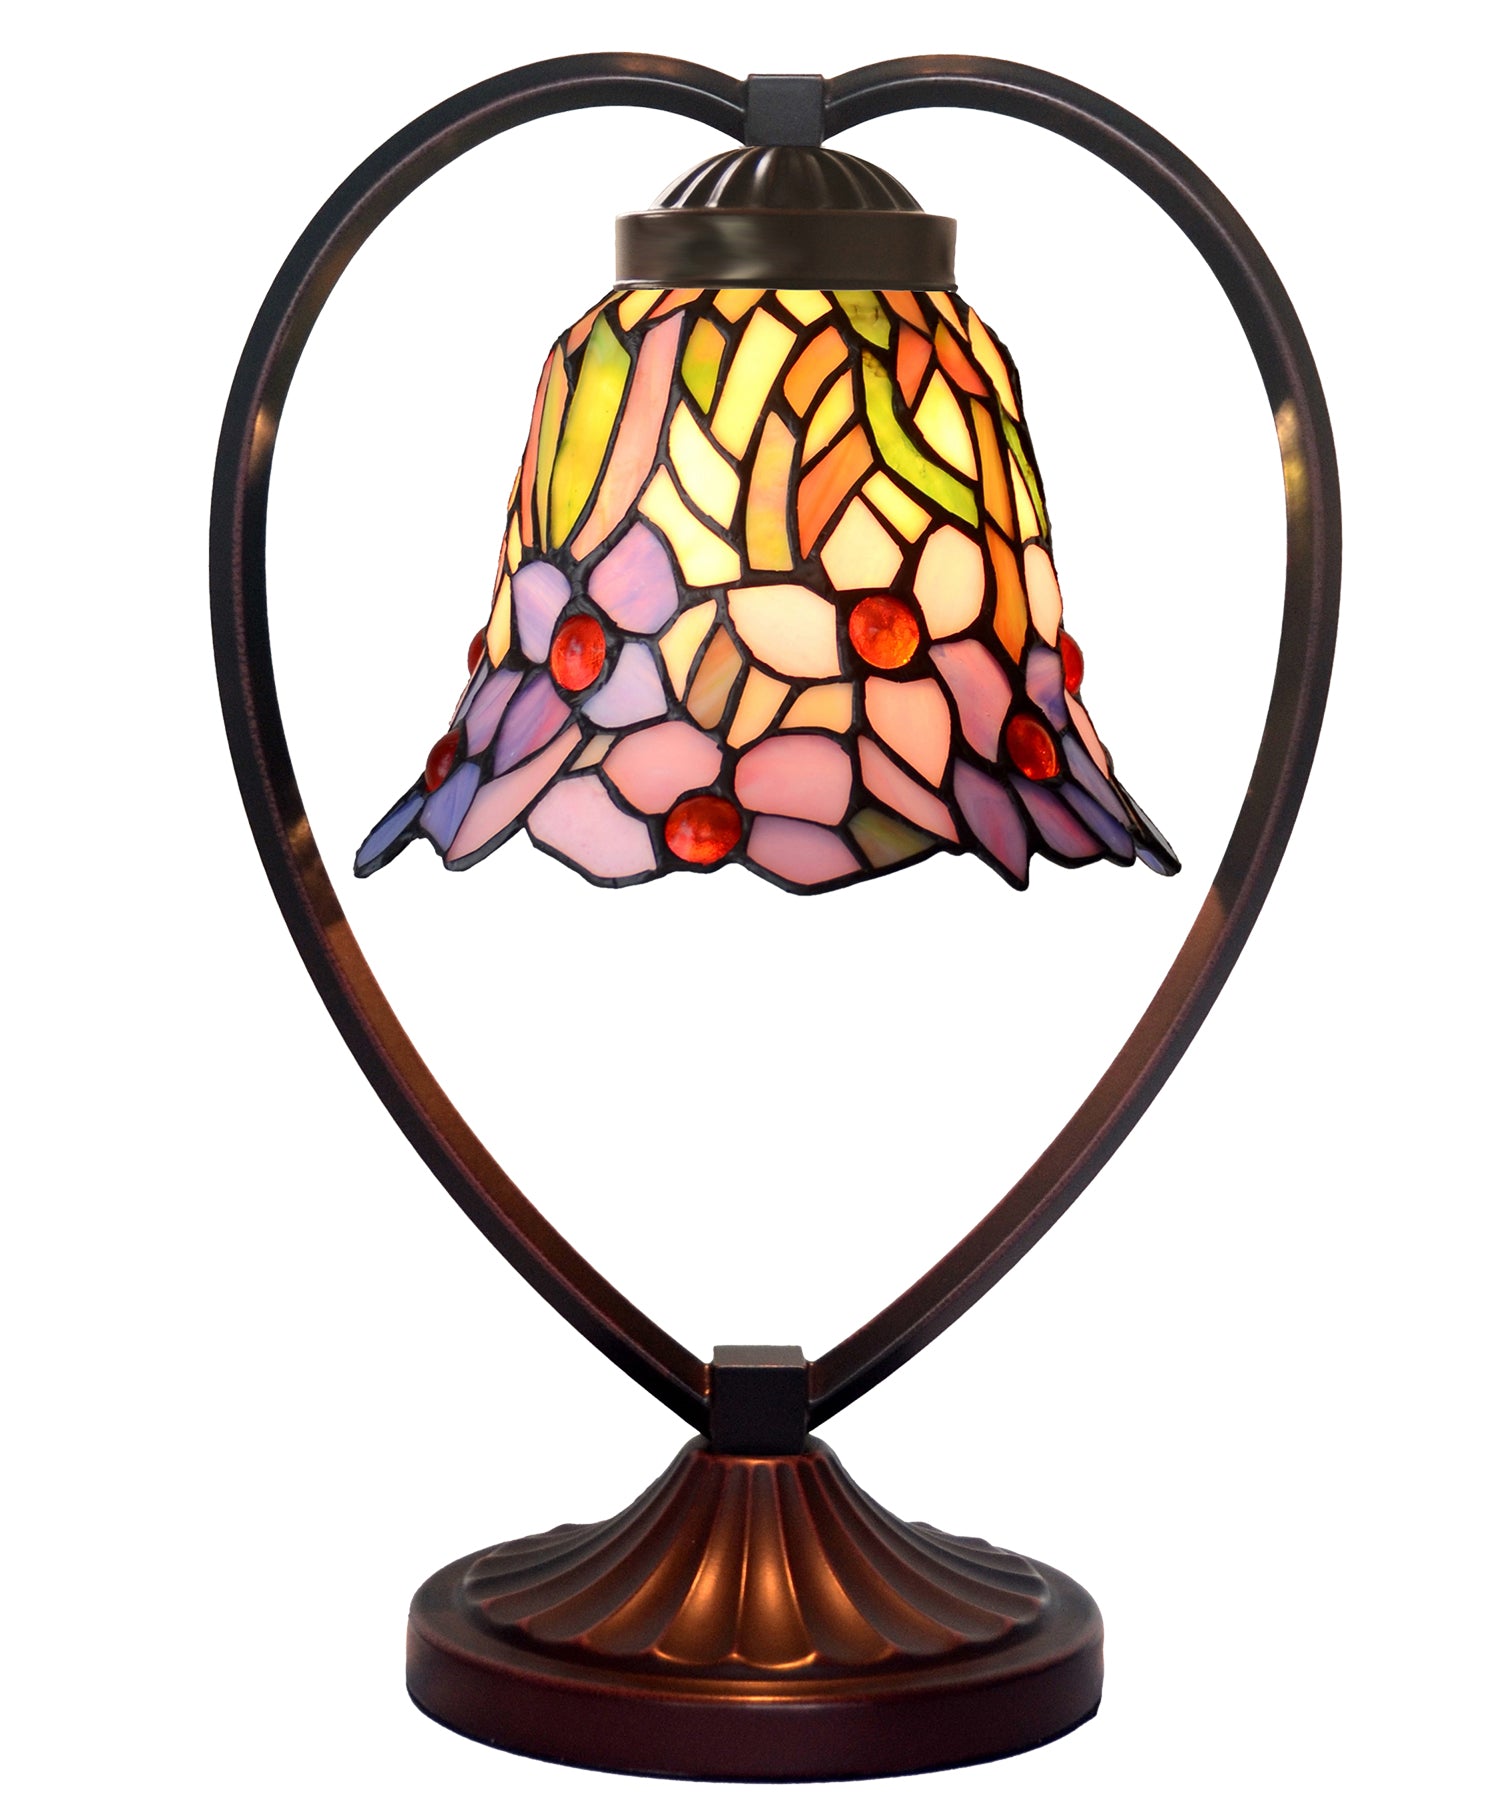 Iris Flower Tiffany Style Stained Glass Table Lamp with Heart-shaped Metal Base